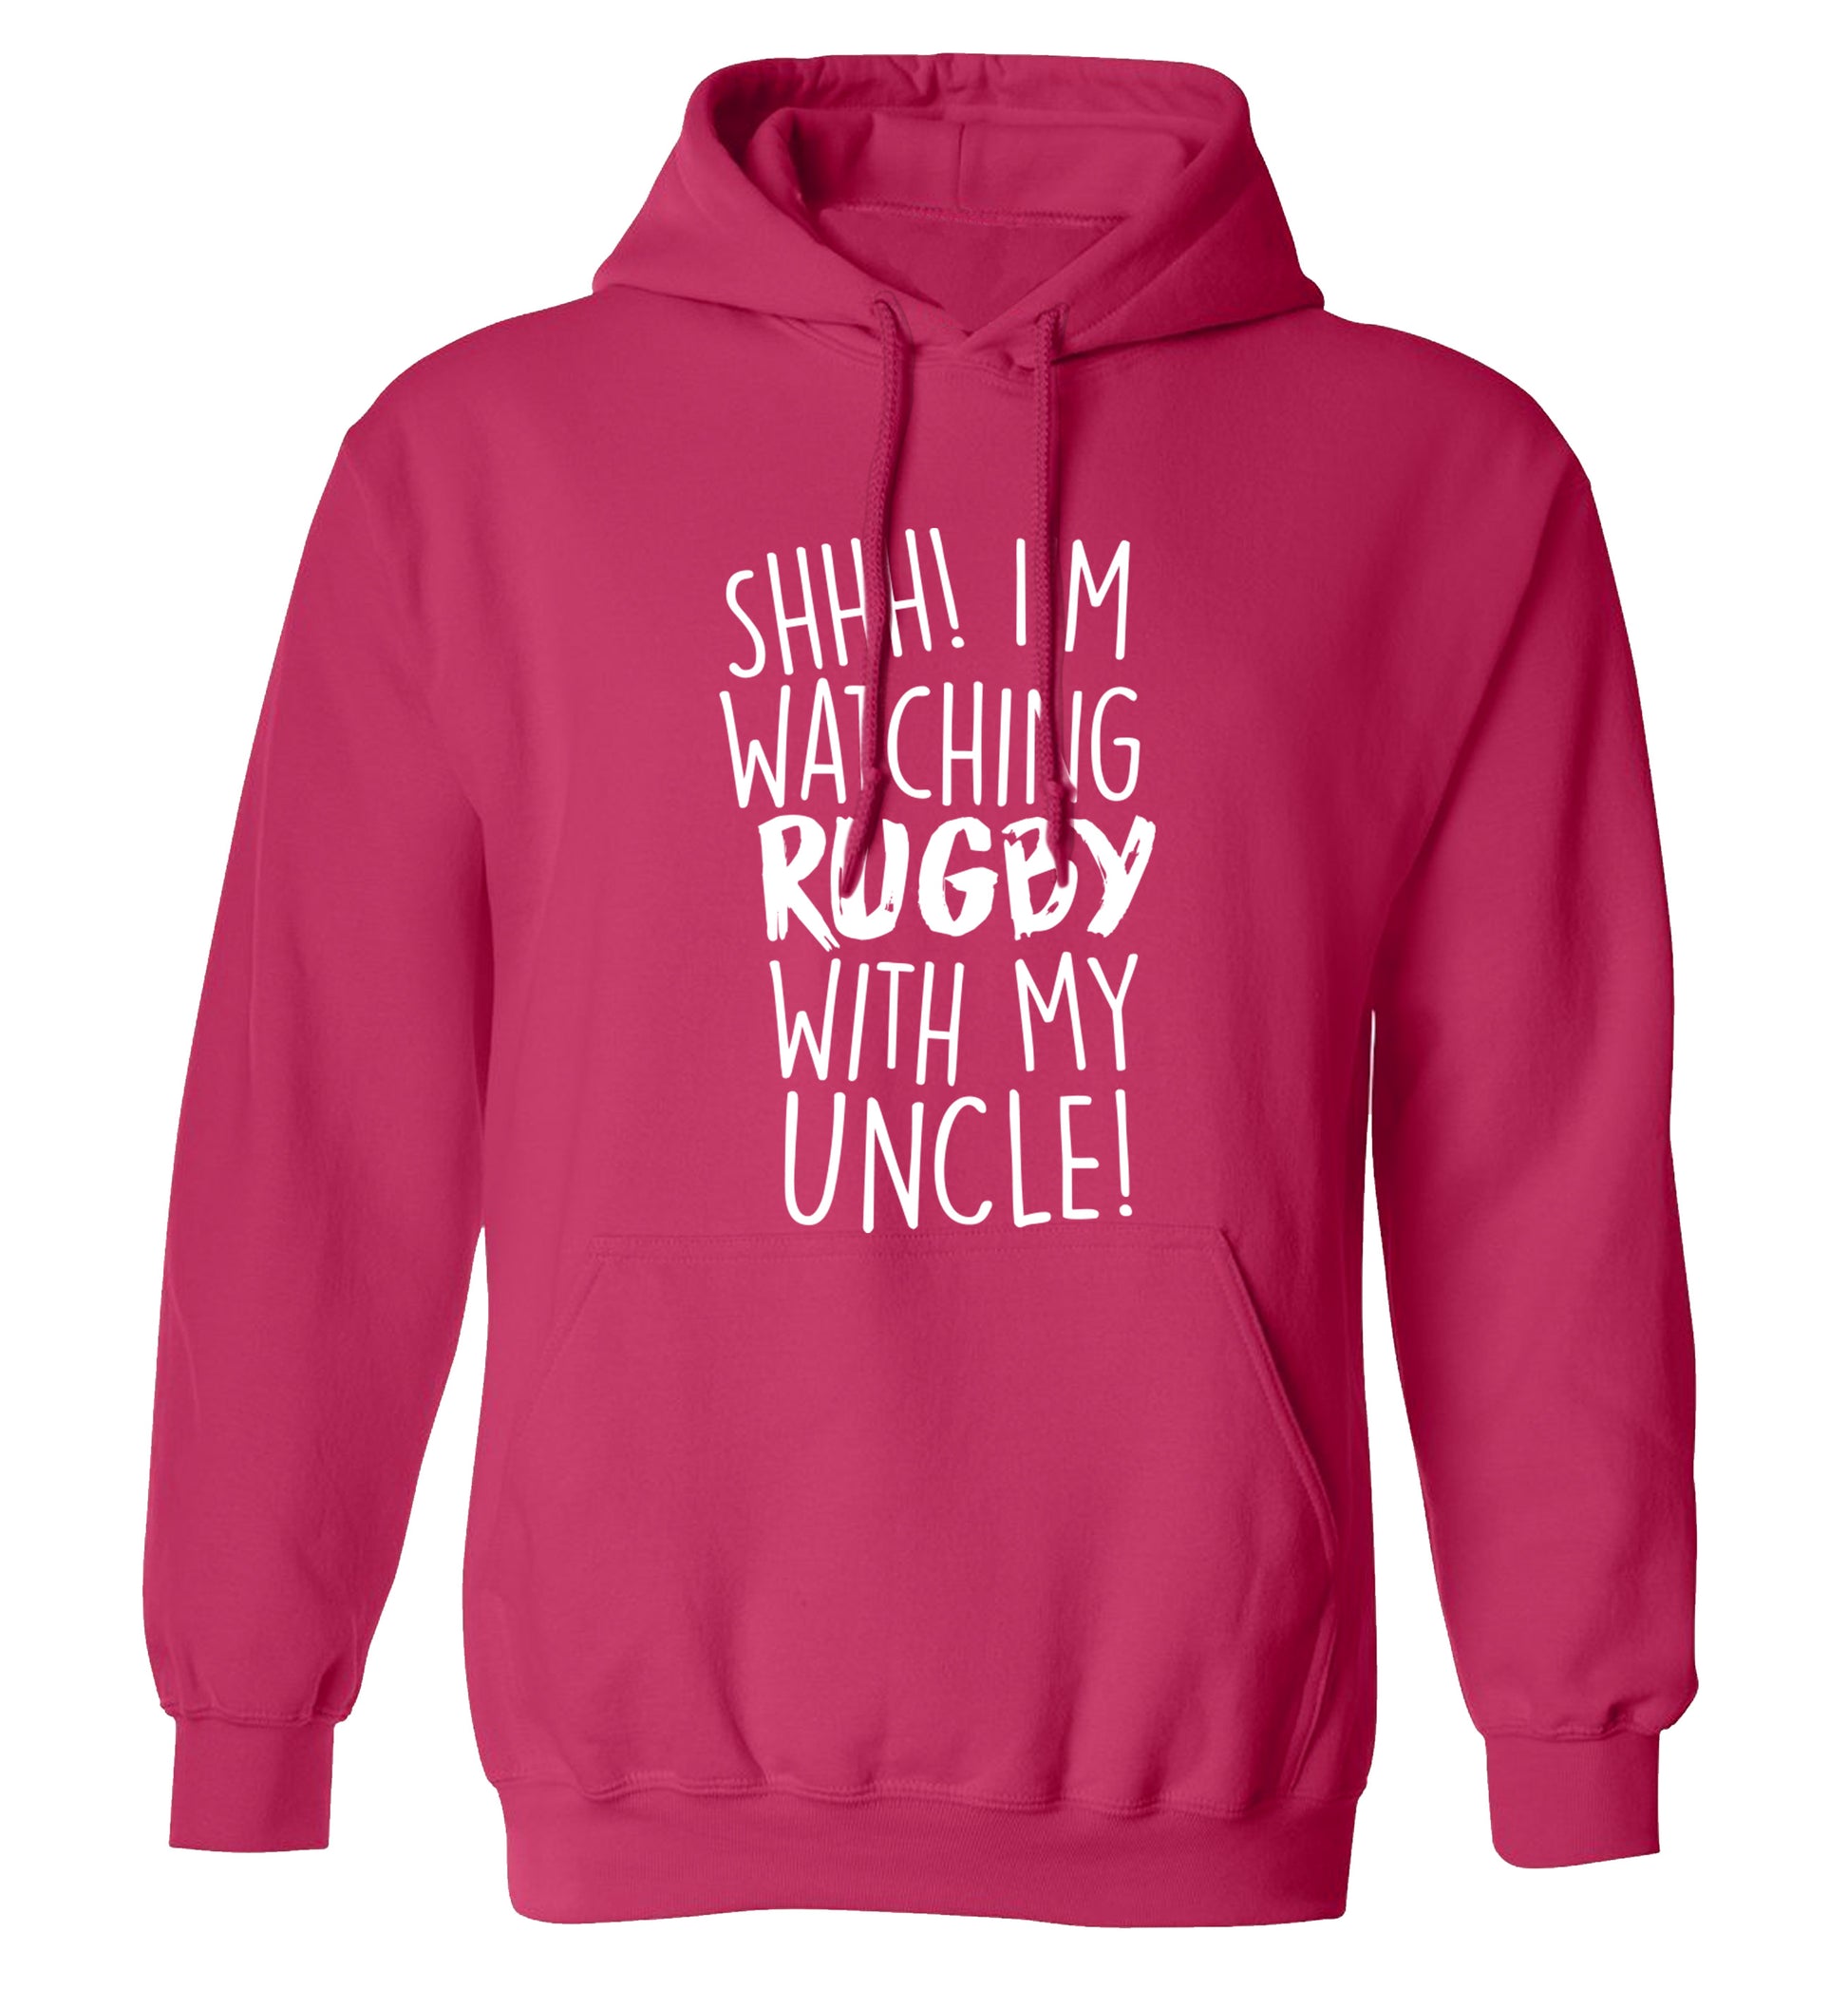 Shh.. I'm watching rugby with my uncle adults unisex pink hoodie 2XL